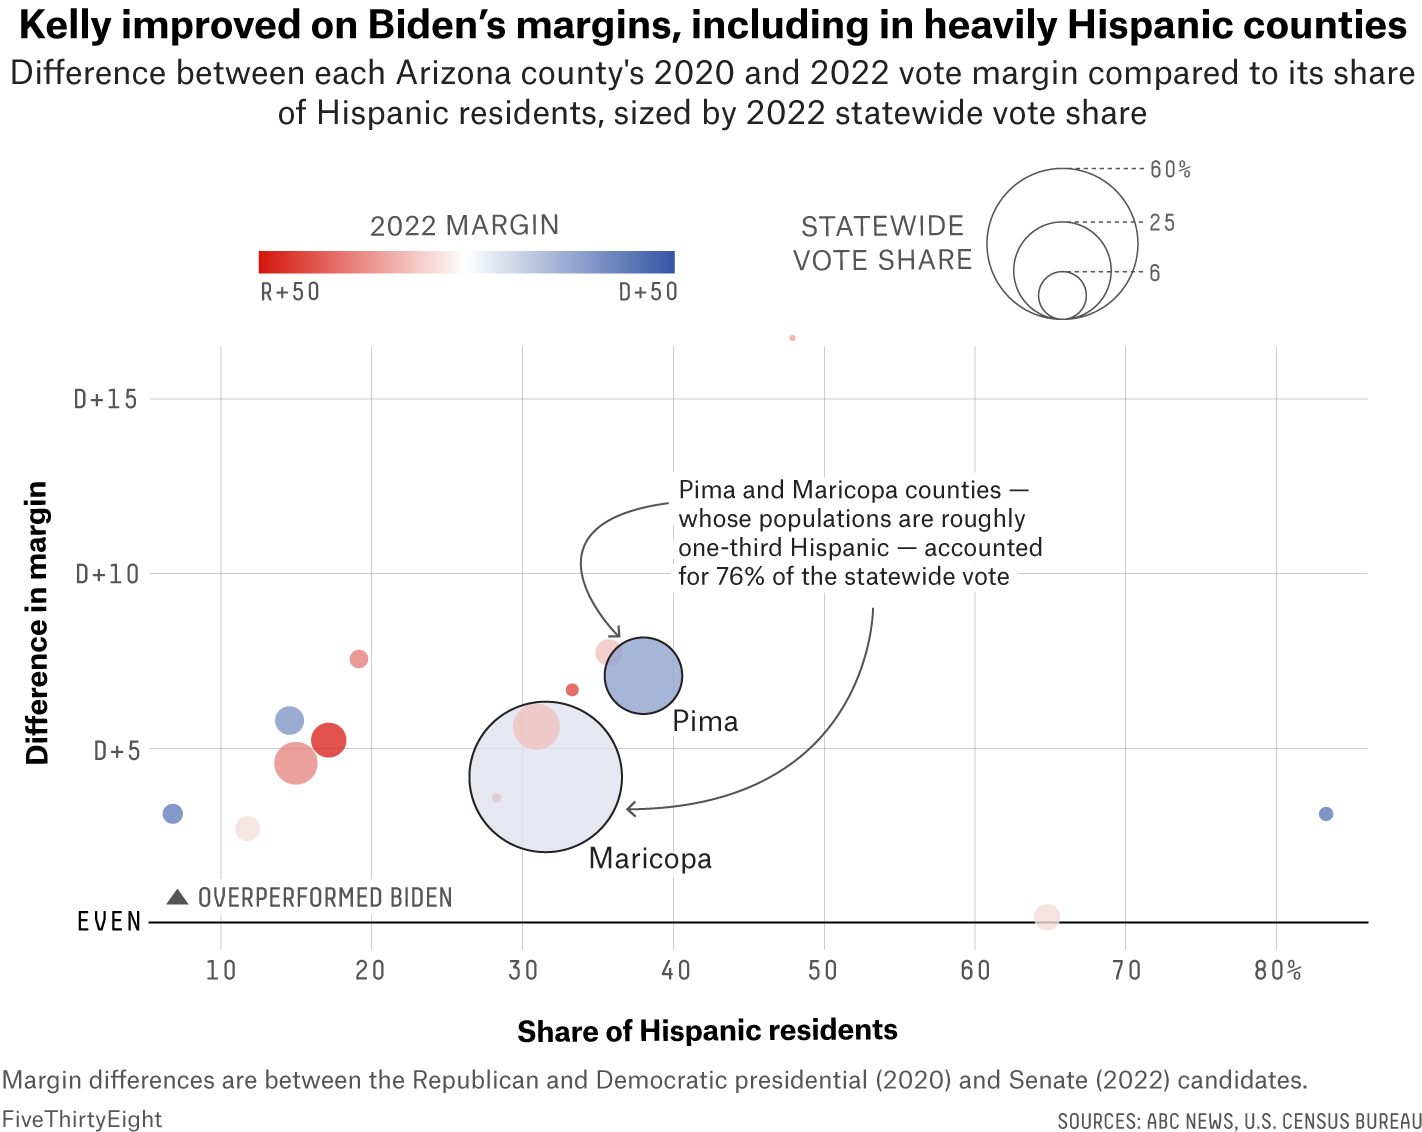 Scatterplot showing the difference between each Arizona county's 2020 presidential election and 2022 Senate race vote margin compared to its share of Hispanic residents, sized by 2022 statewide vote share. The two largest bubbles represent Maricopa and Pima counties, where Democratic Sen. Mark Kelly ran a few points ahead of President Biden.